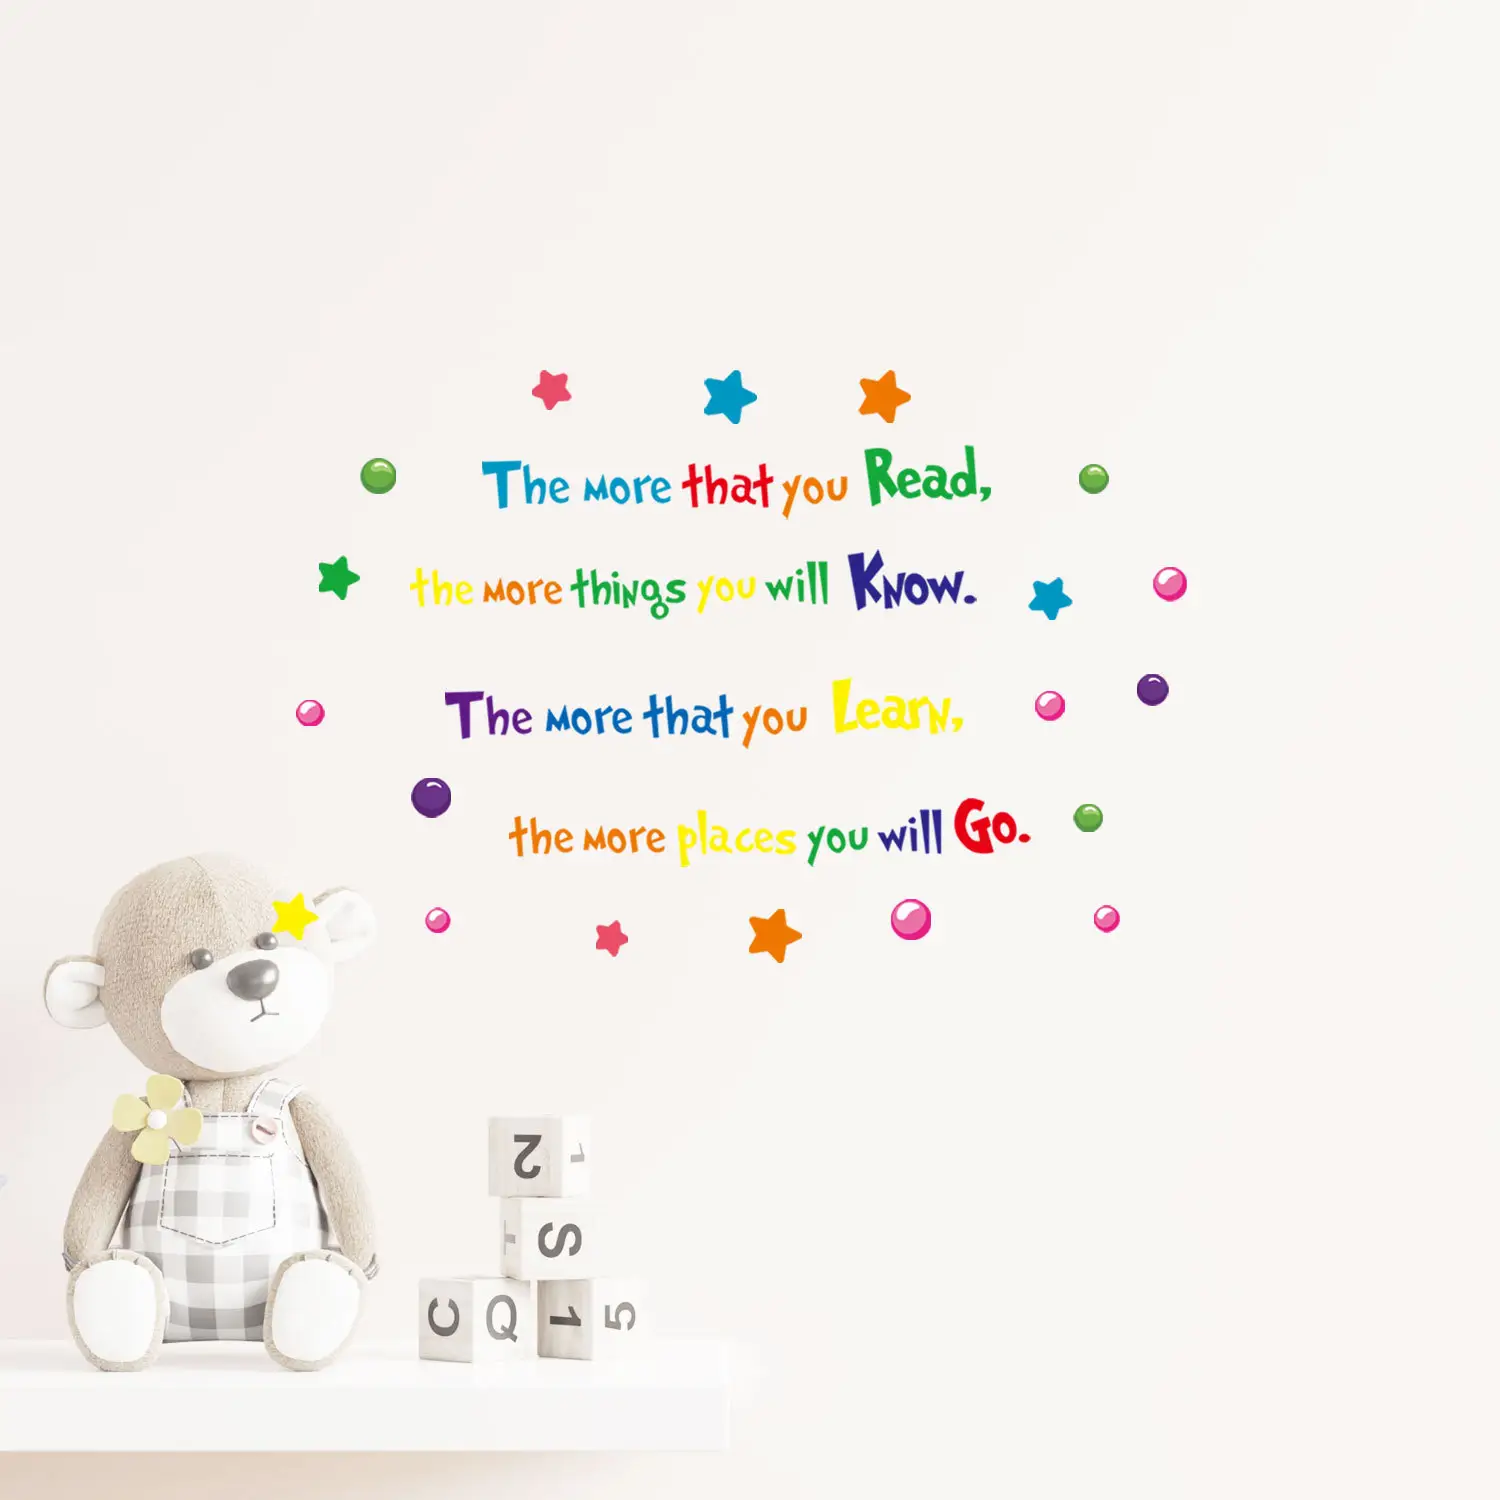 The More That You Read Wall Sticker Inspirational Quotes and Children Wall Stickers Kids Bedroom Classroom Wall Decor